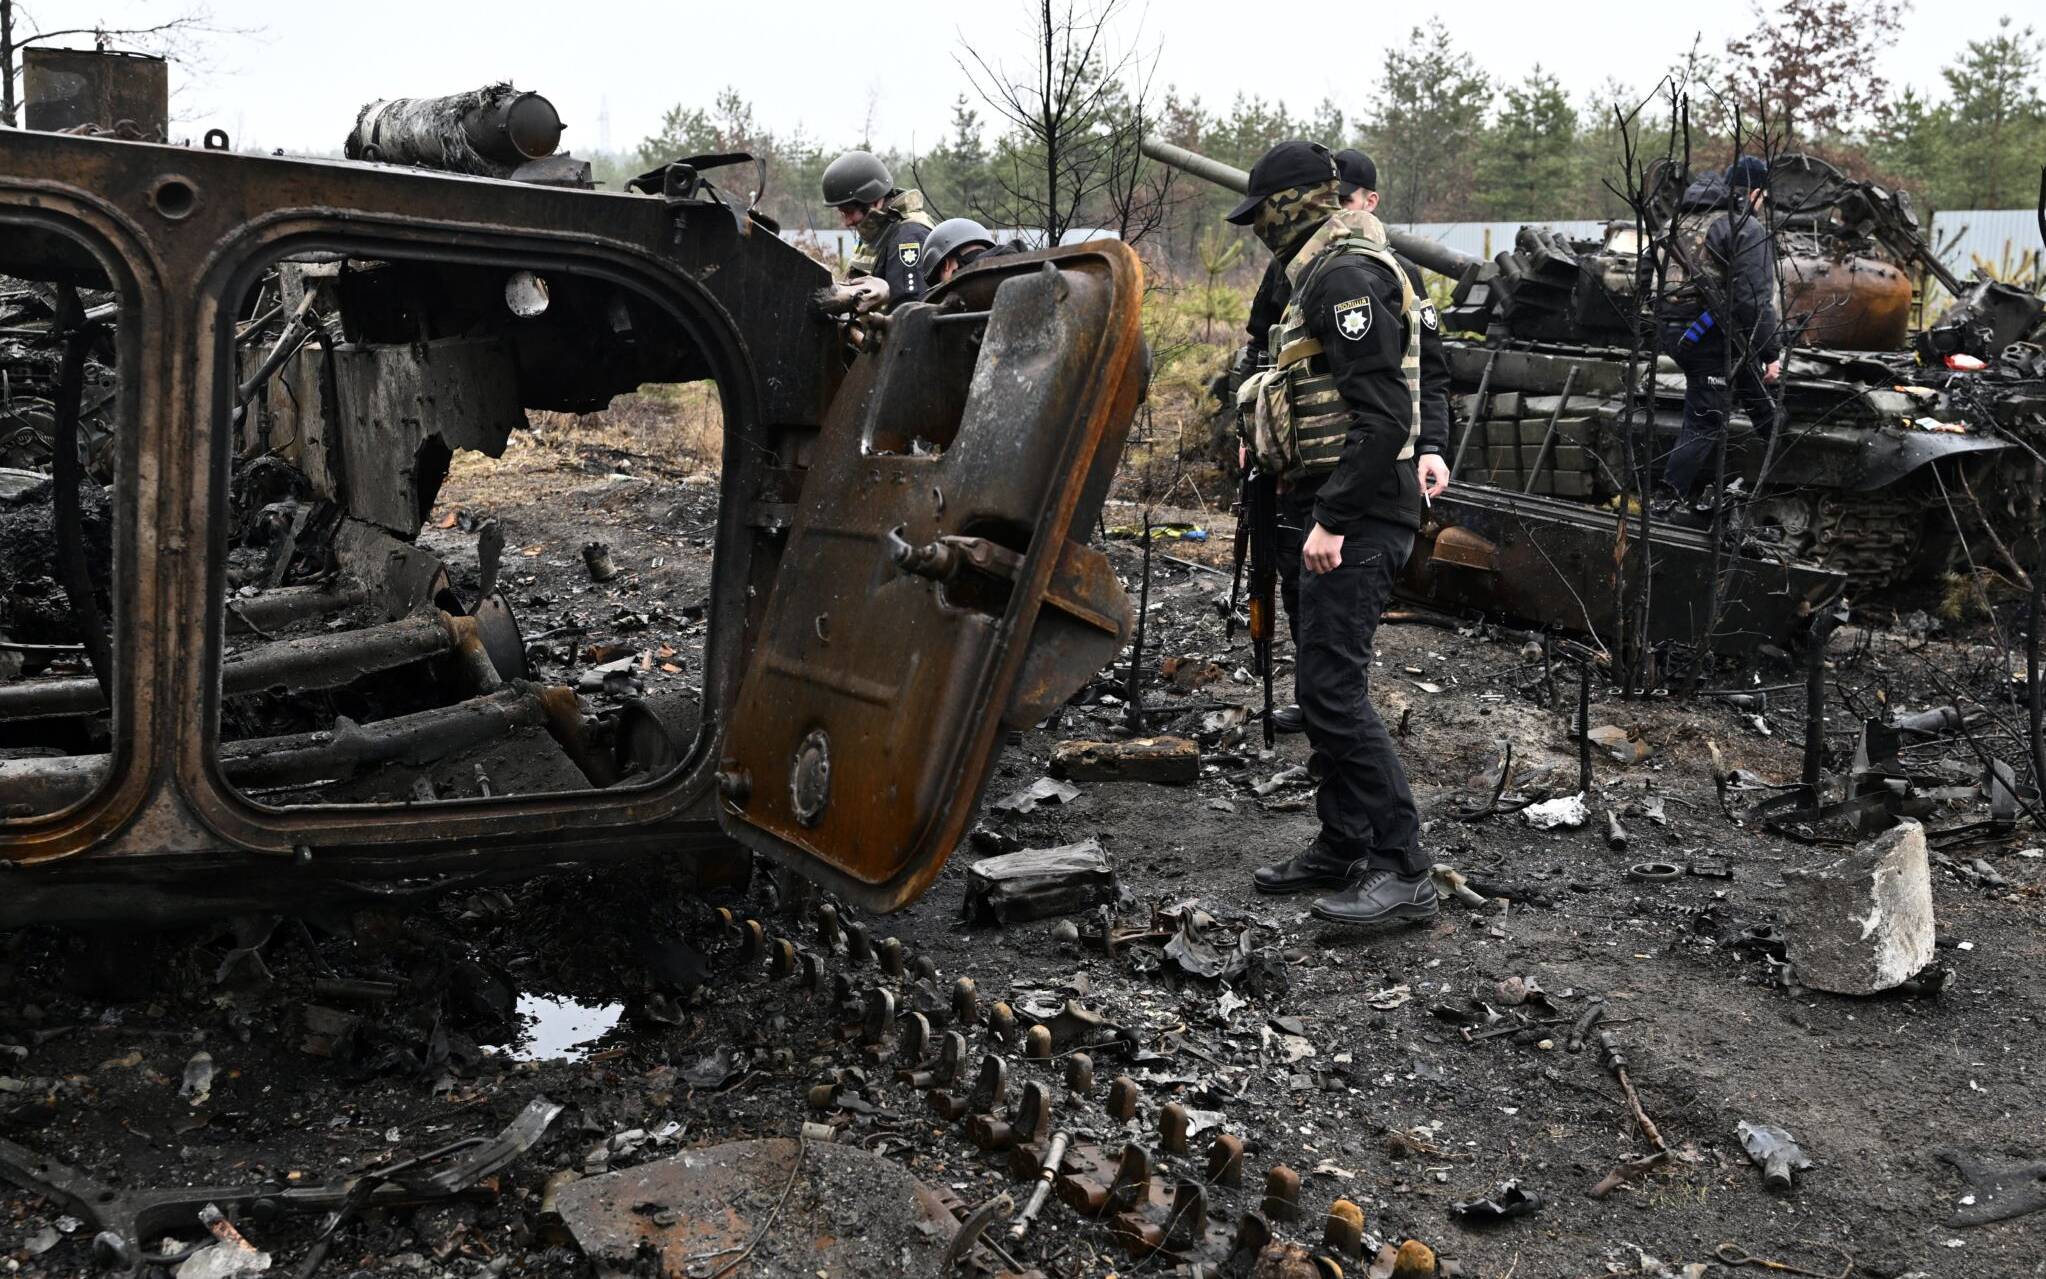 Ukrainian policemen check the wreckage of destroyed Russian tanks and armoured personnel carriers (APC) in Dmytrivka village, west of Kyiv, on April 2, 2022 as Ukraine says Russian forces are making a "rapid retreat" from northern areas around Kyiv and the city of Chernigiv. (Photo by Genya SAVILOV / AFP)